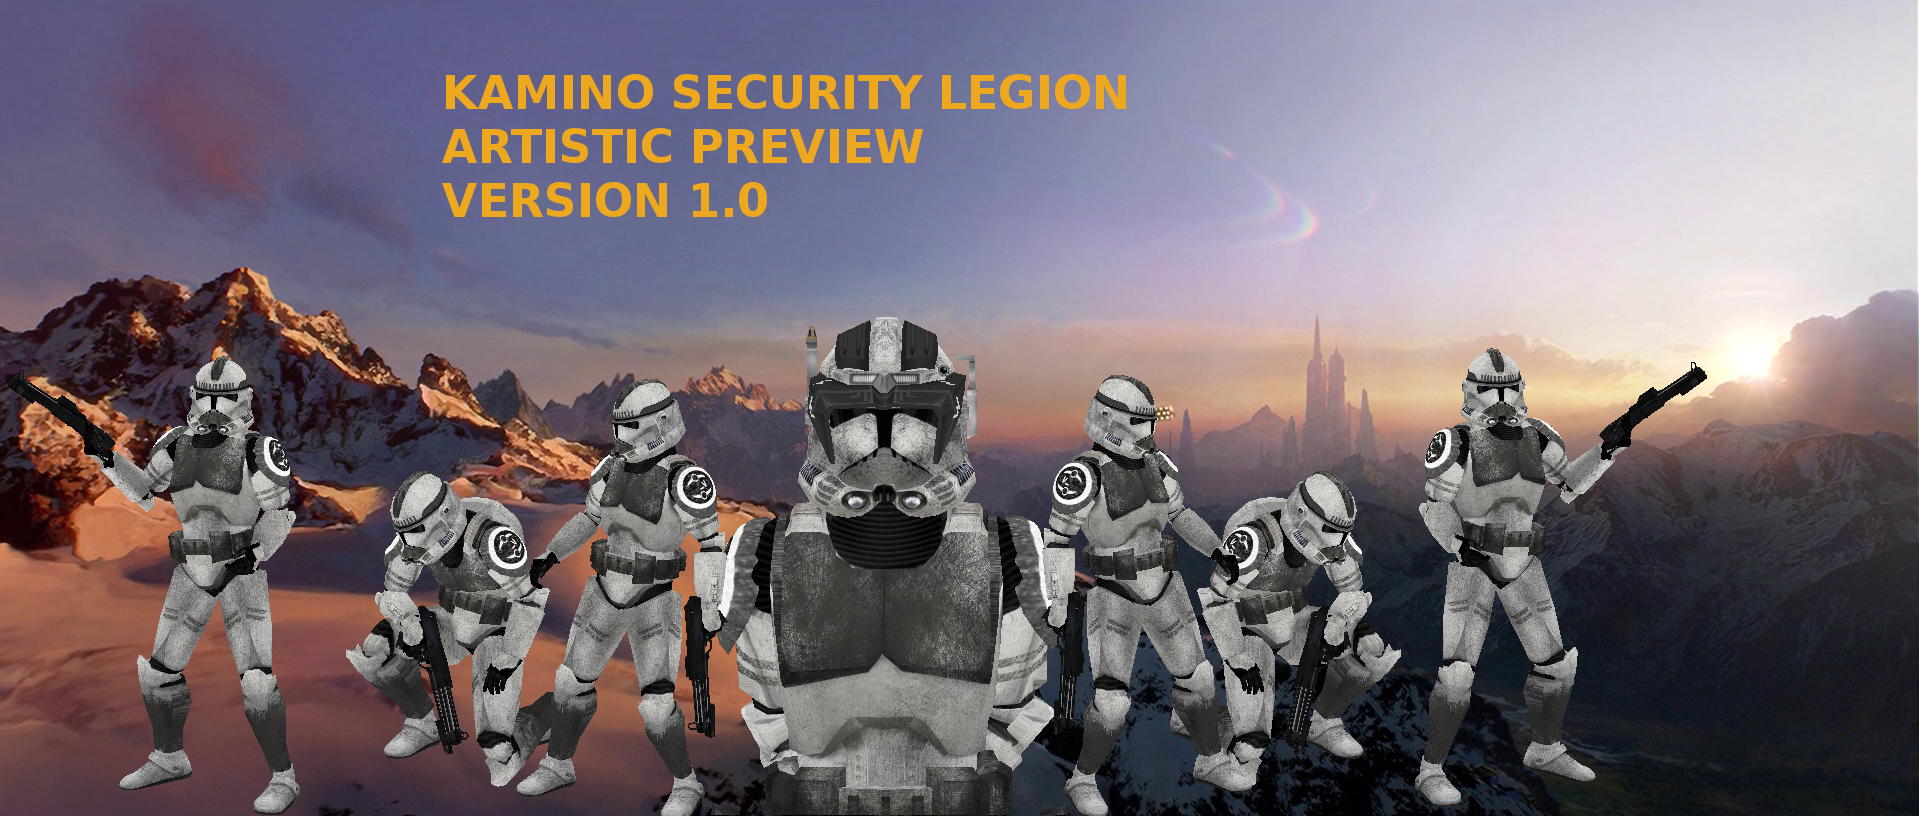 More information about "Kamino Security Legion"